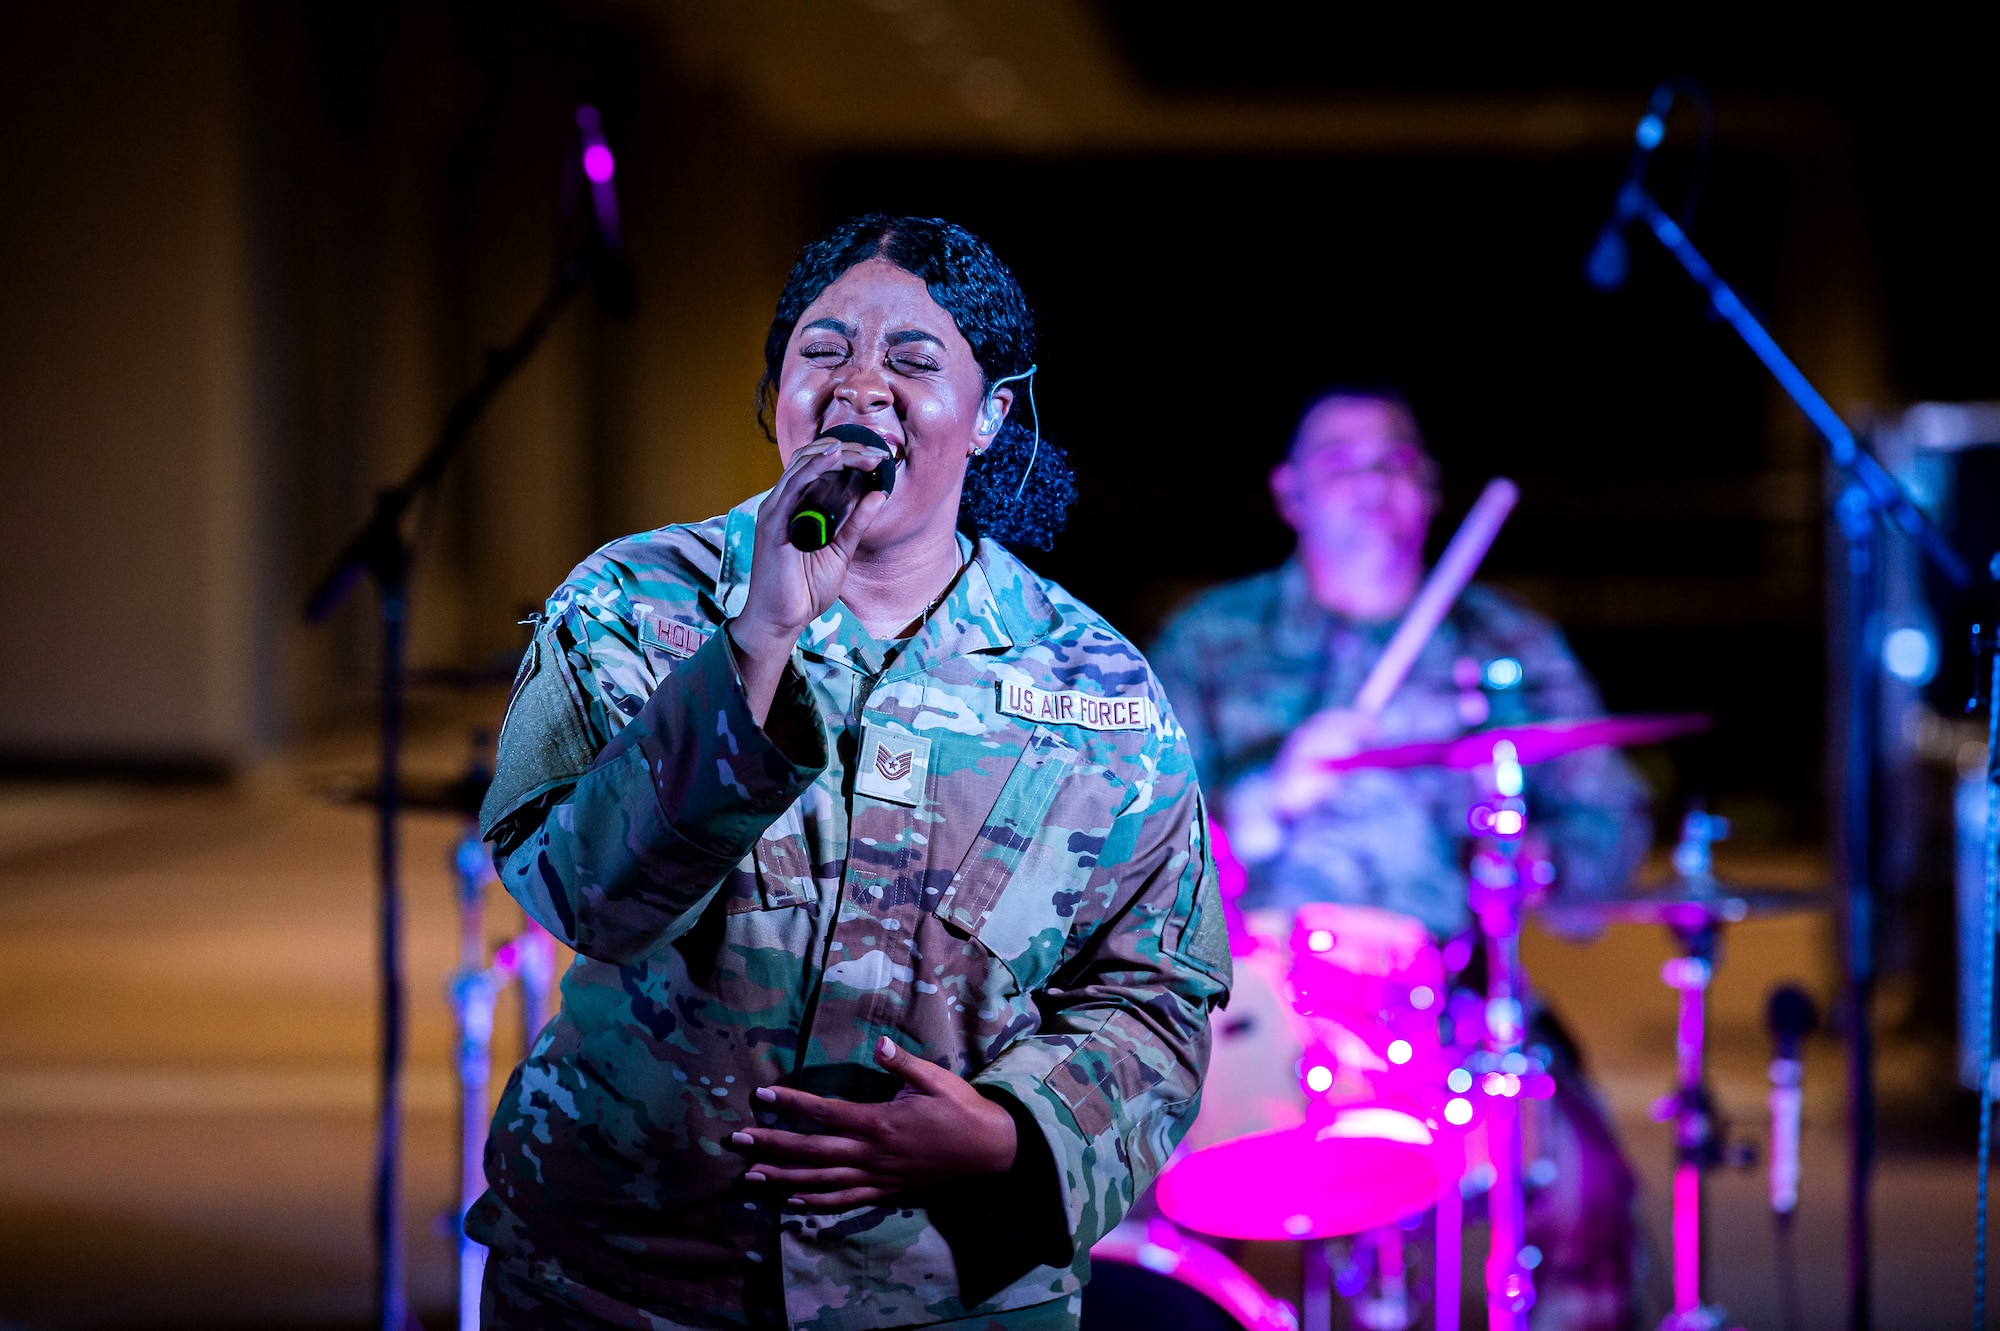 TSgt Serenity Holloway singing with Blue Delta at USAFA

U.S. Air Force Academy --  (U.S. Air Force photo/Trevor Cokley)